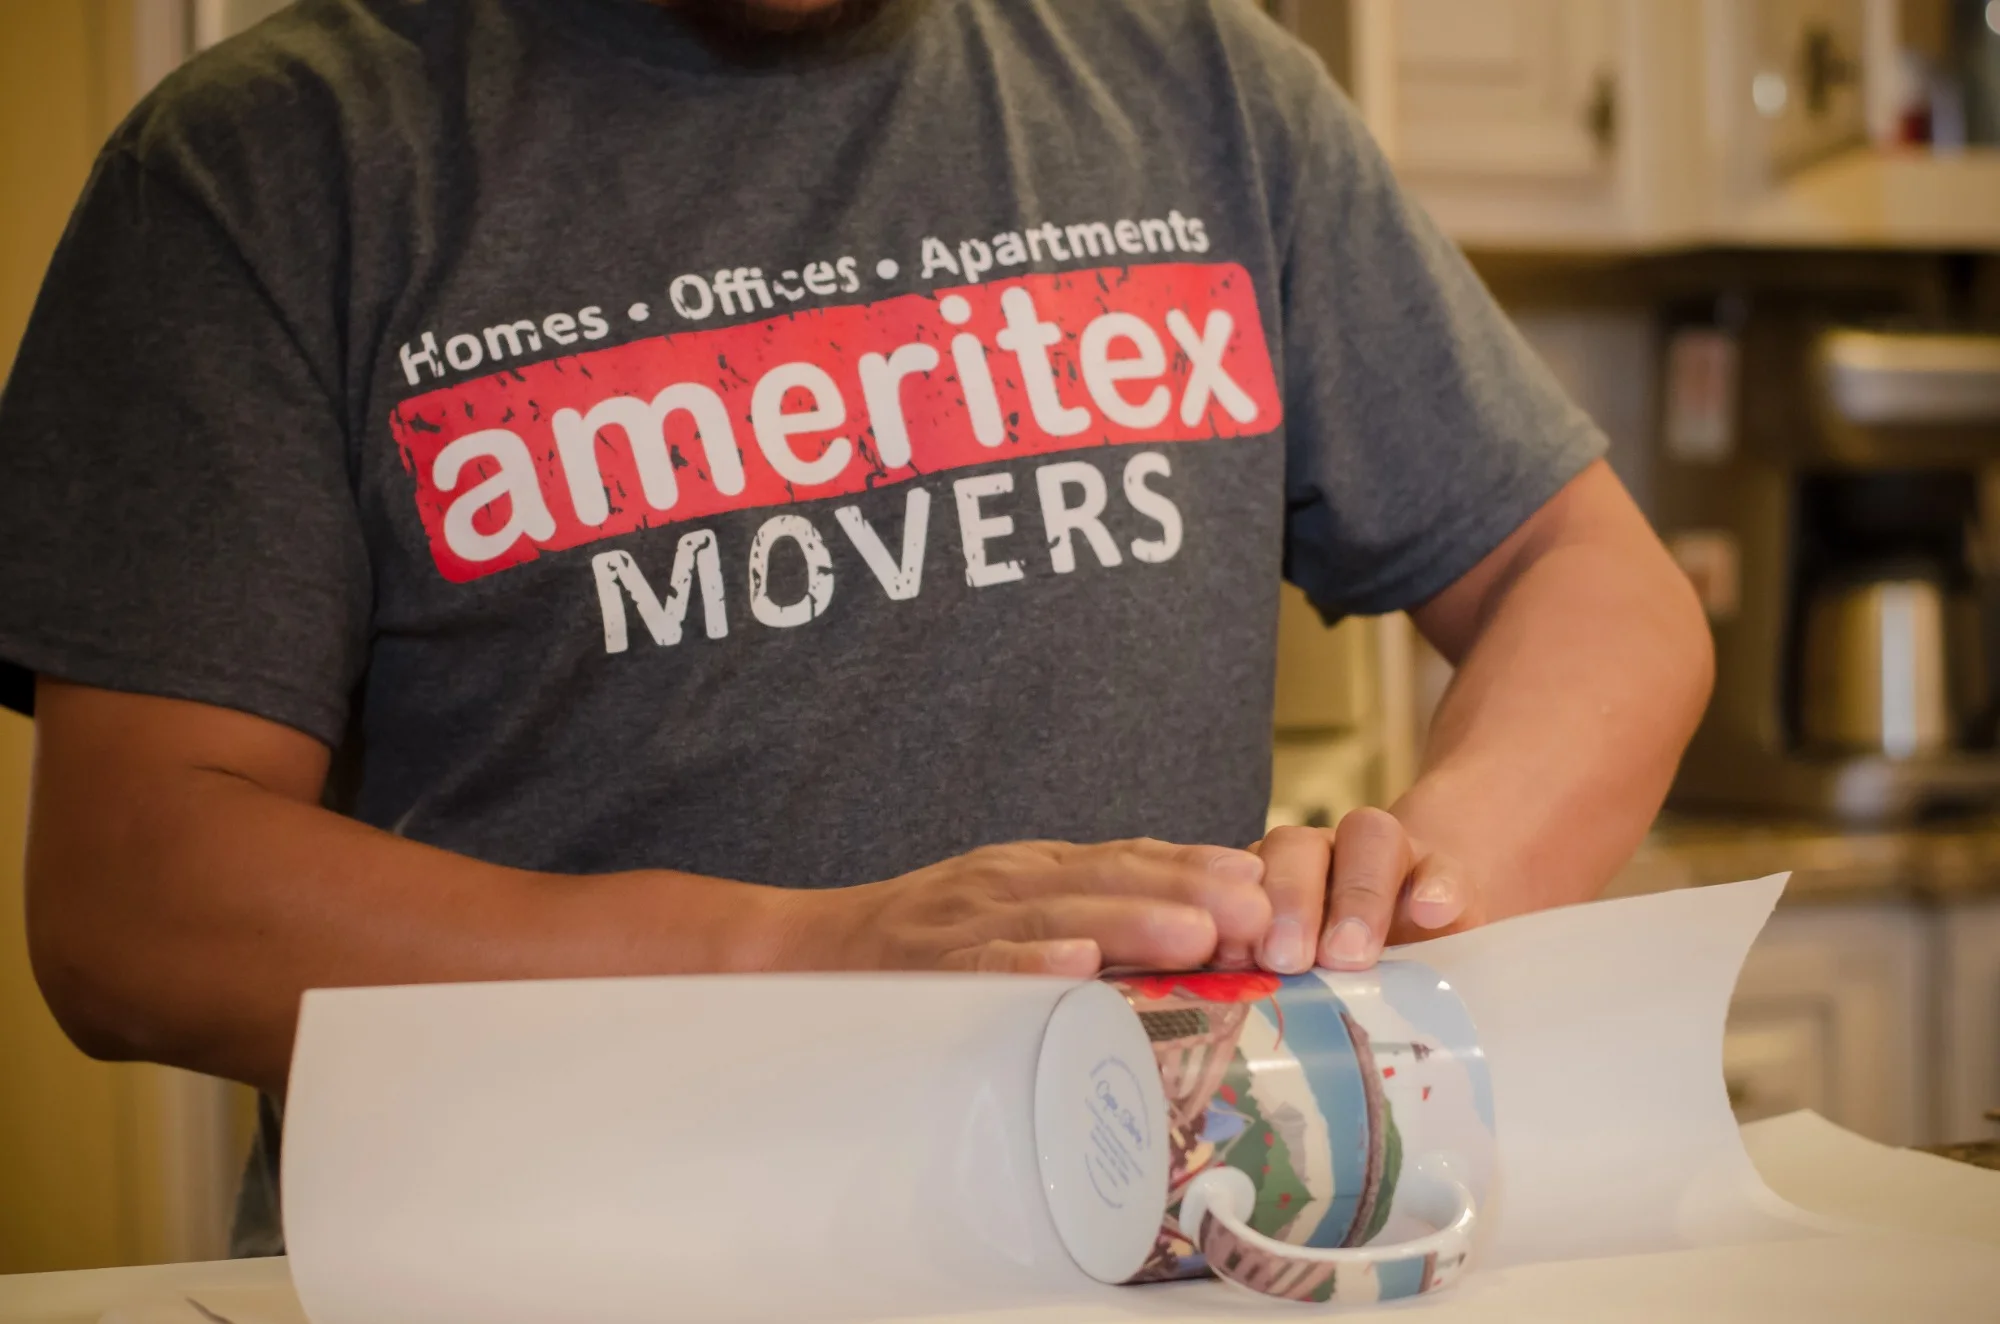 Apartment Movers in Texas